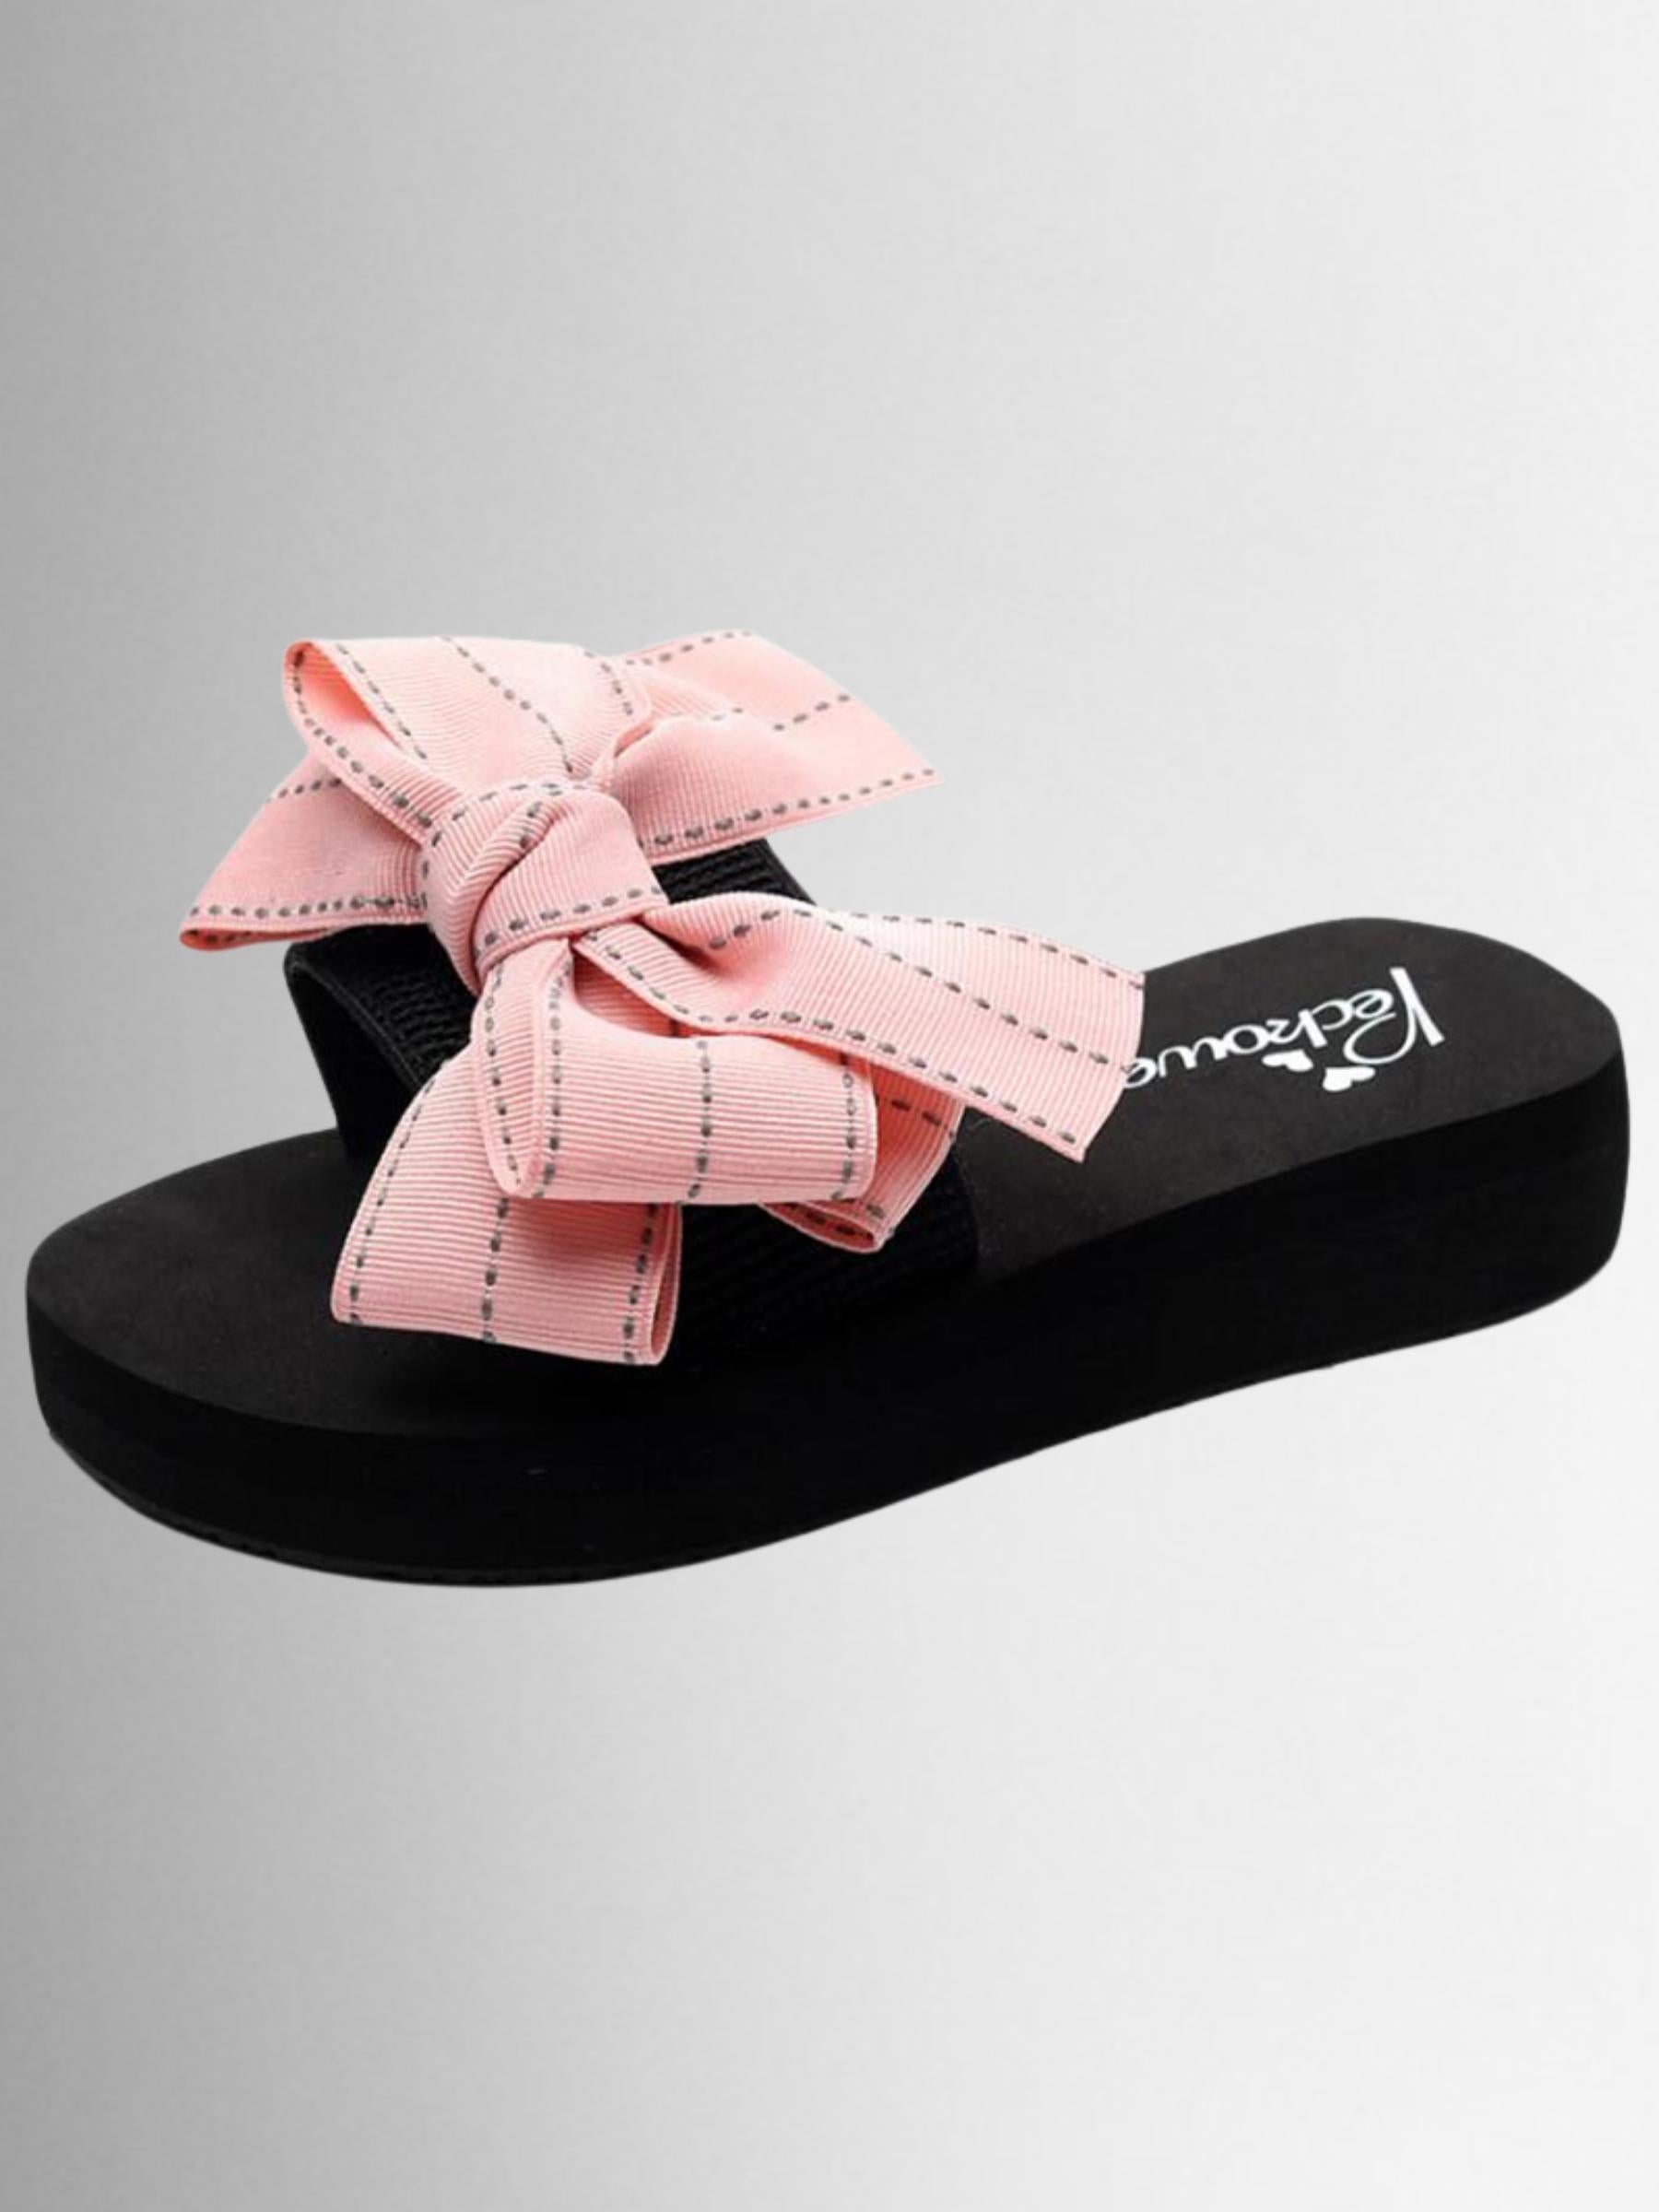 Girls Bow Flip Flops By Liv and Mia - Mia Belle Girls